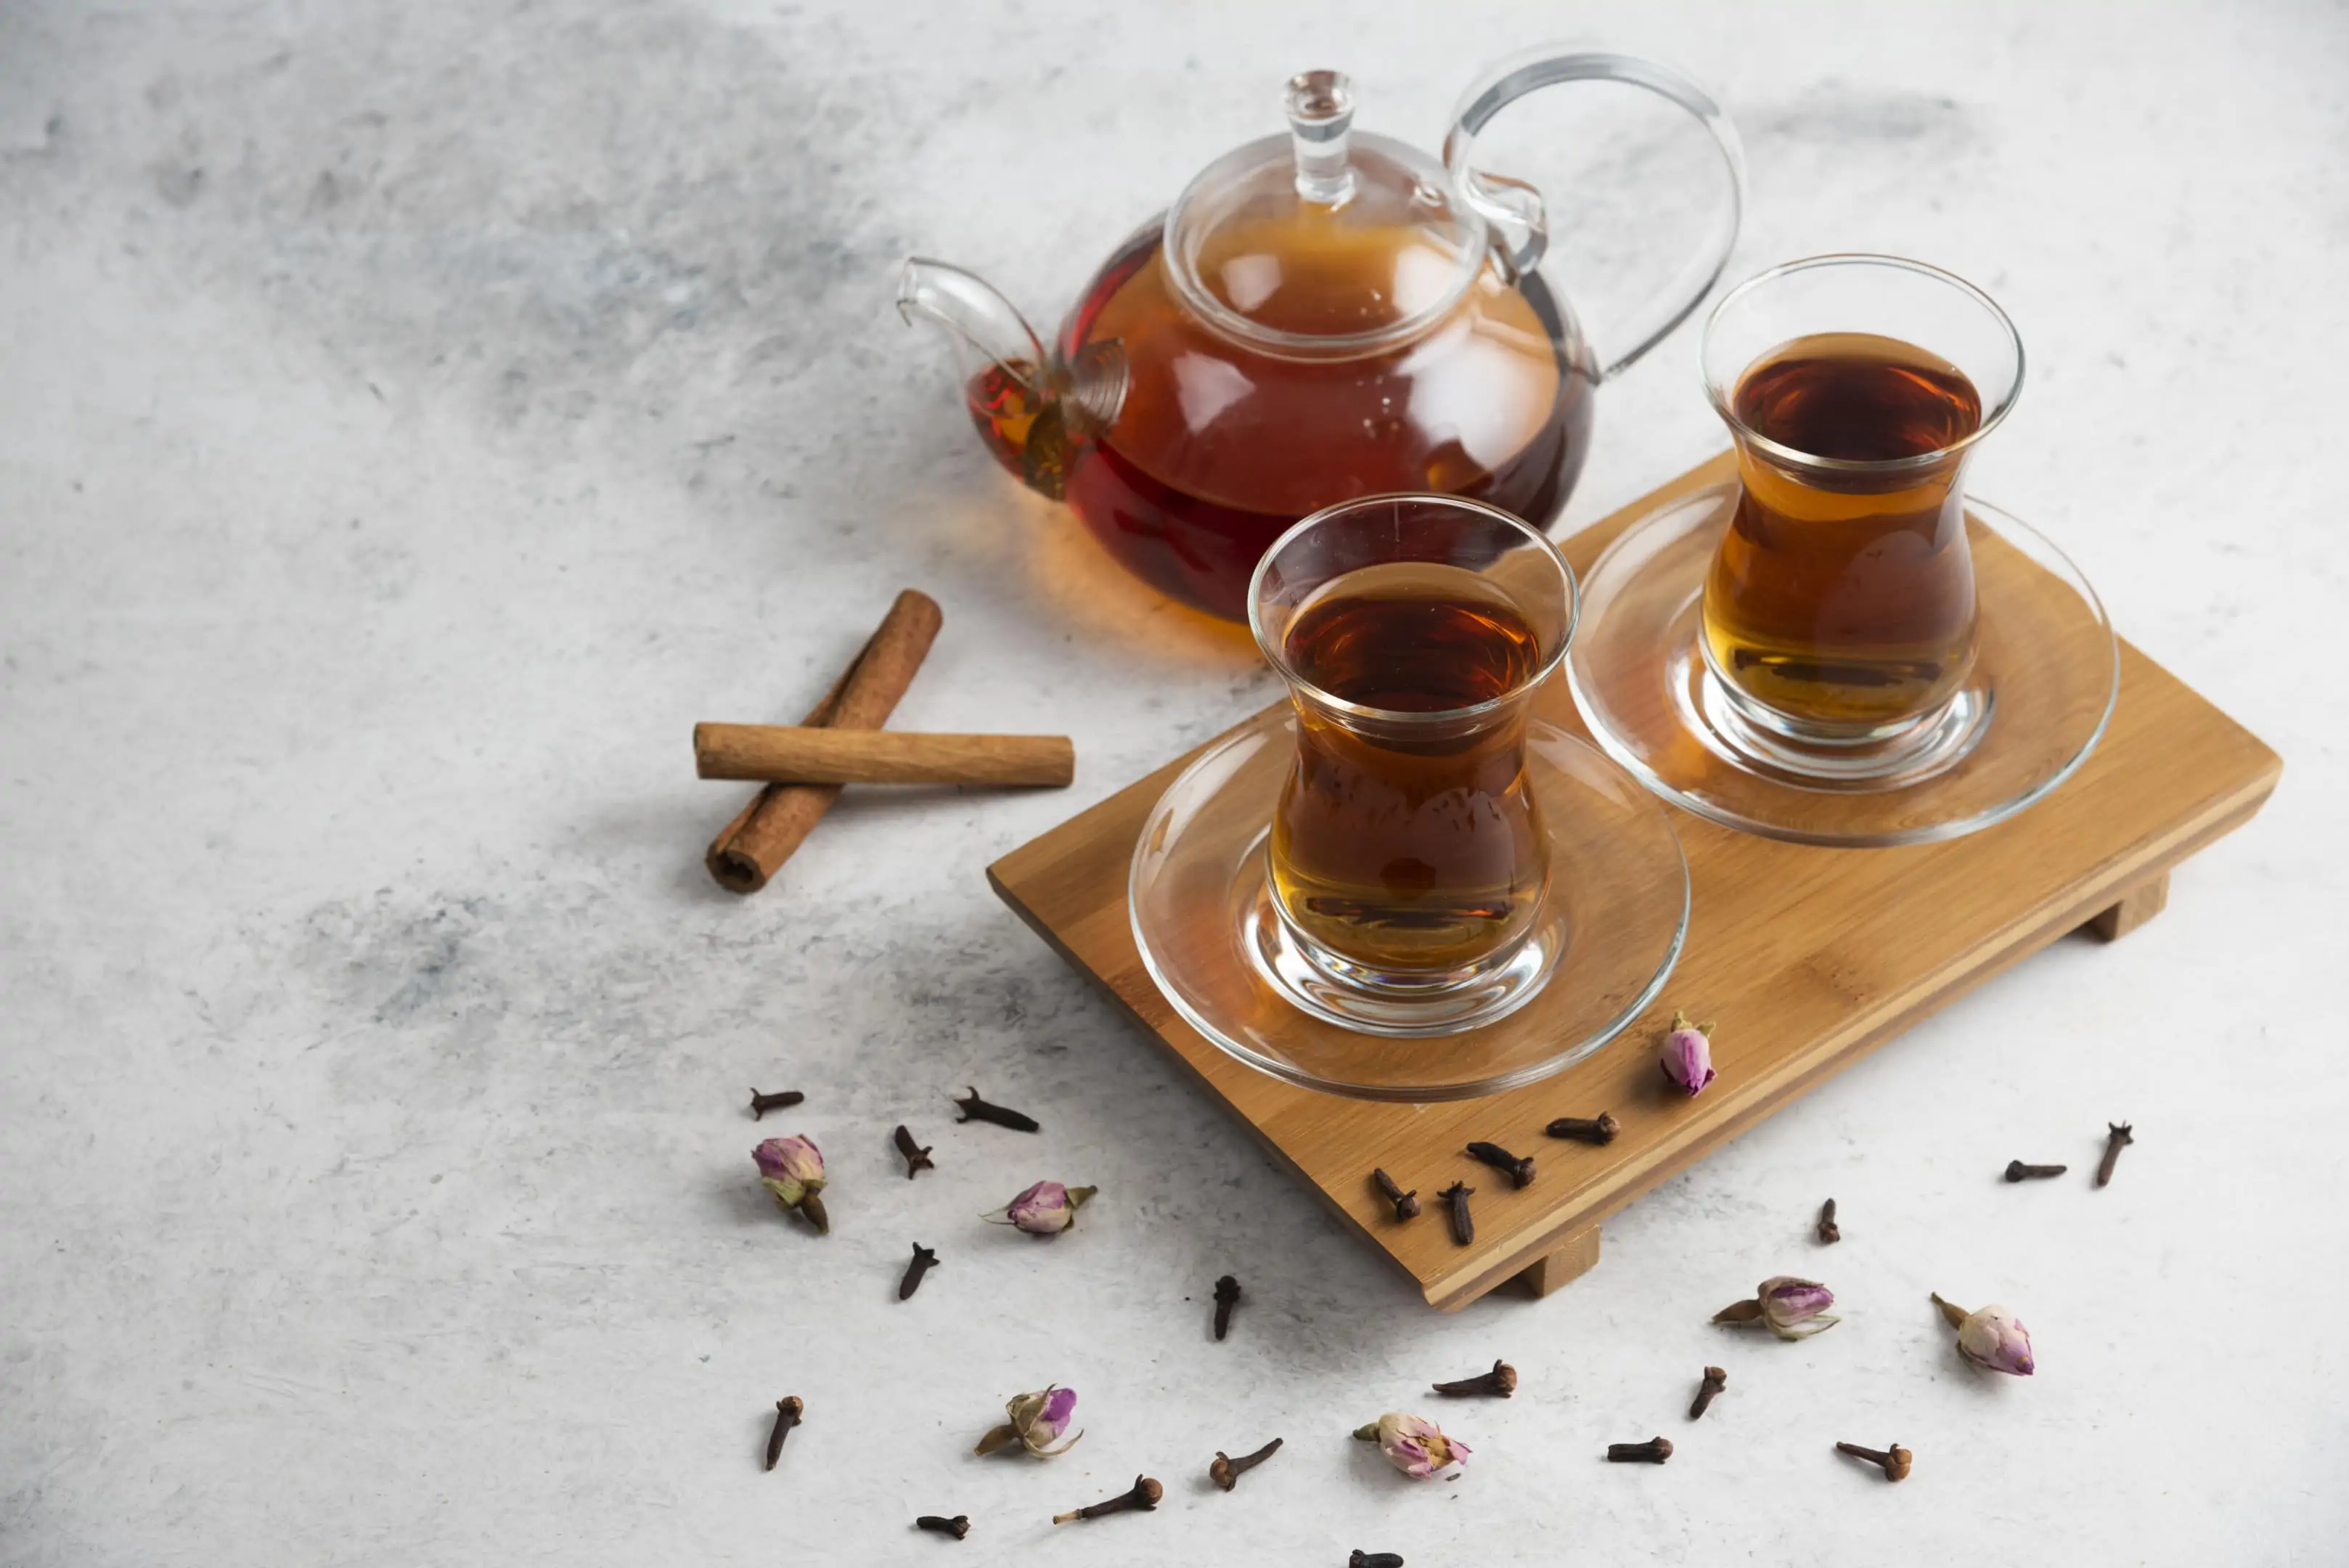 Cups of tea with cloves cinnamon sticks and dried roses